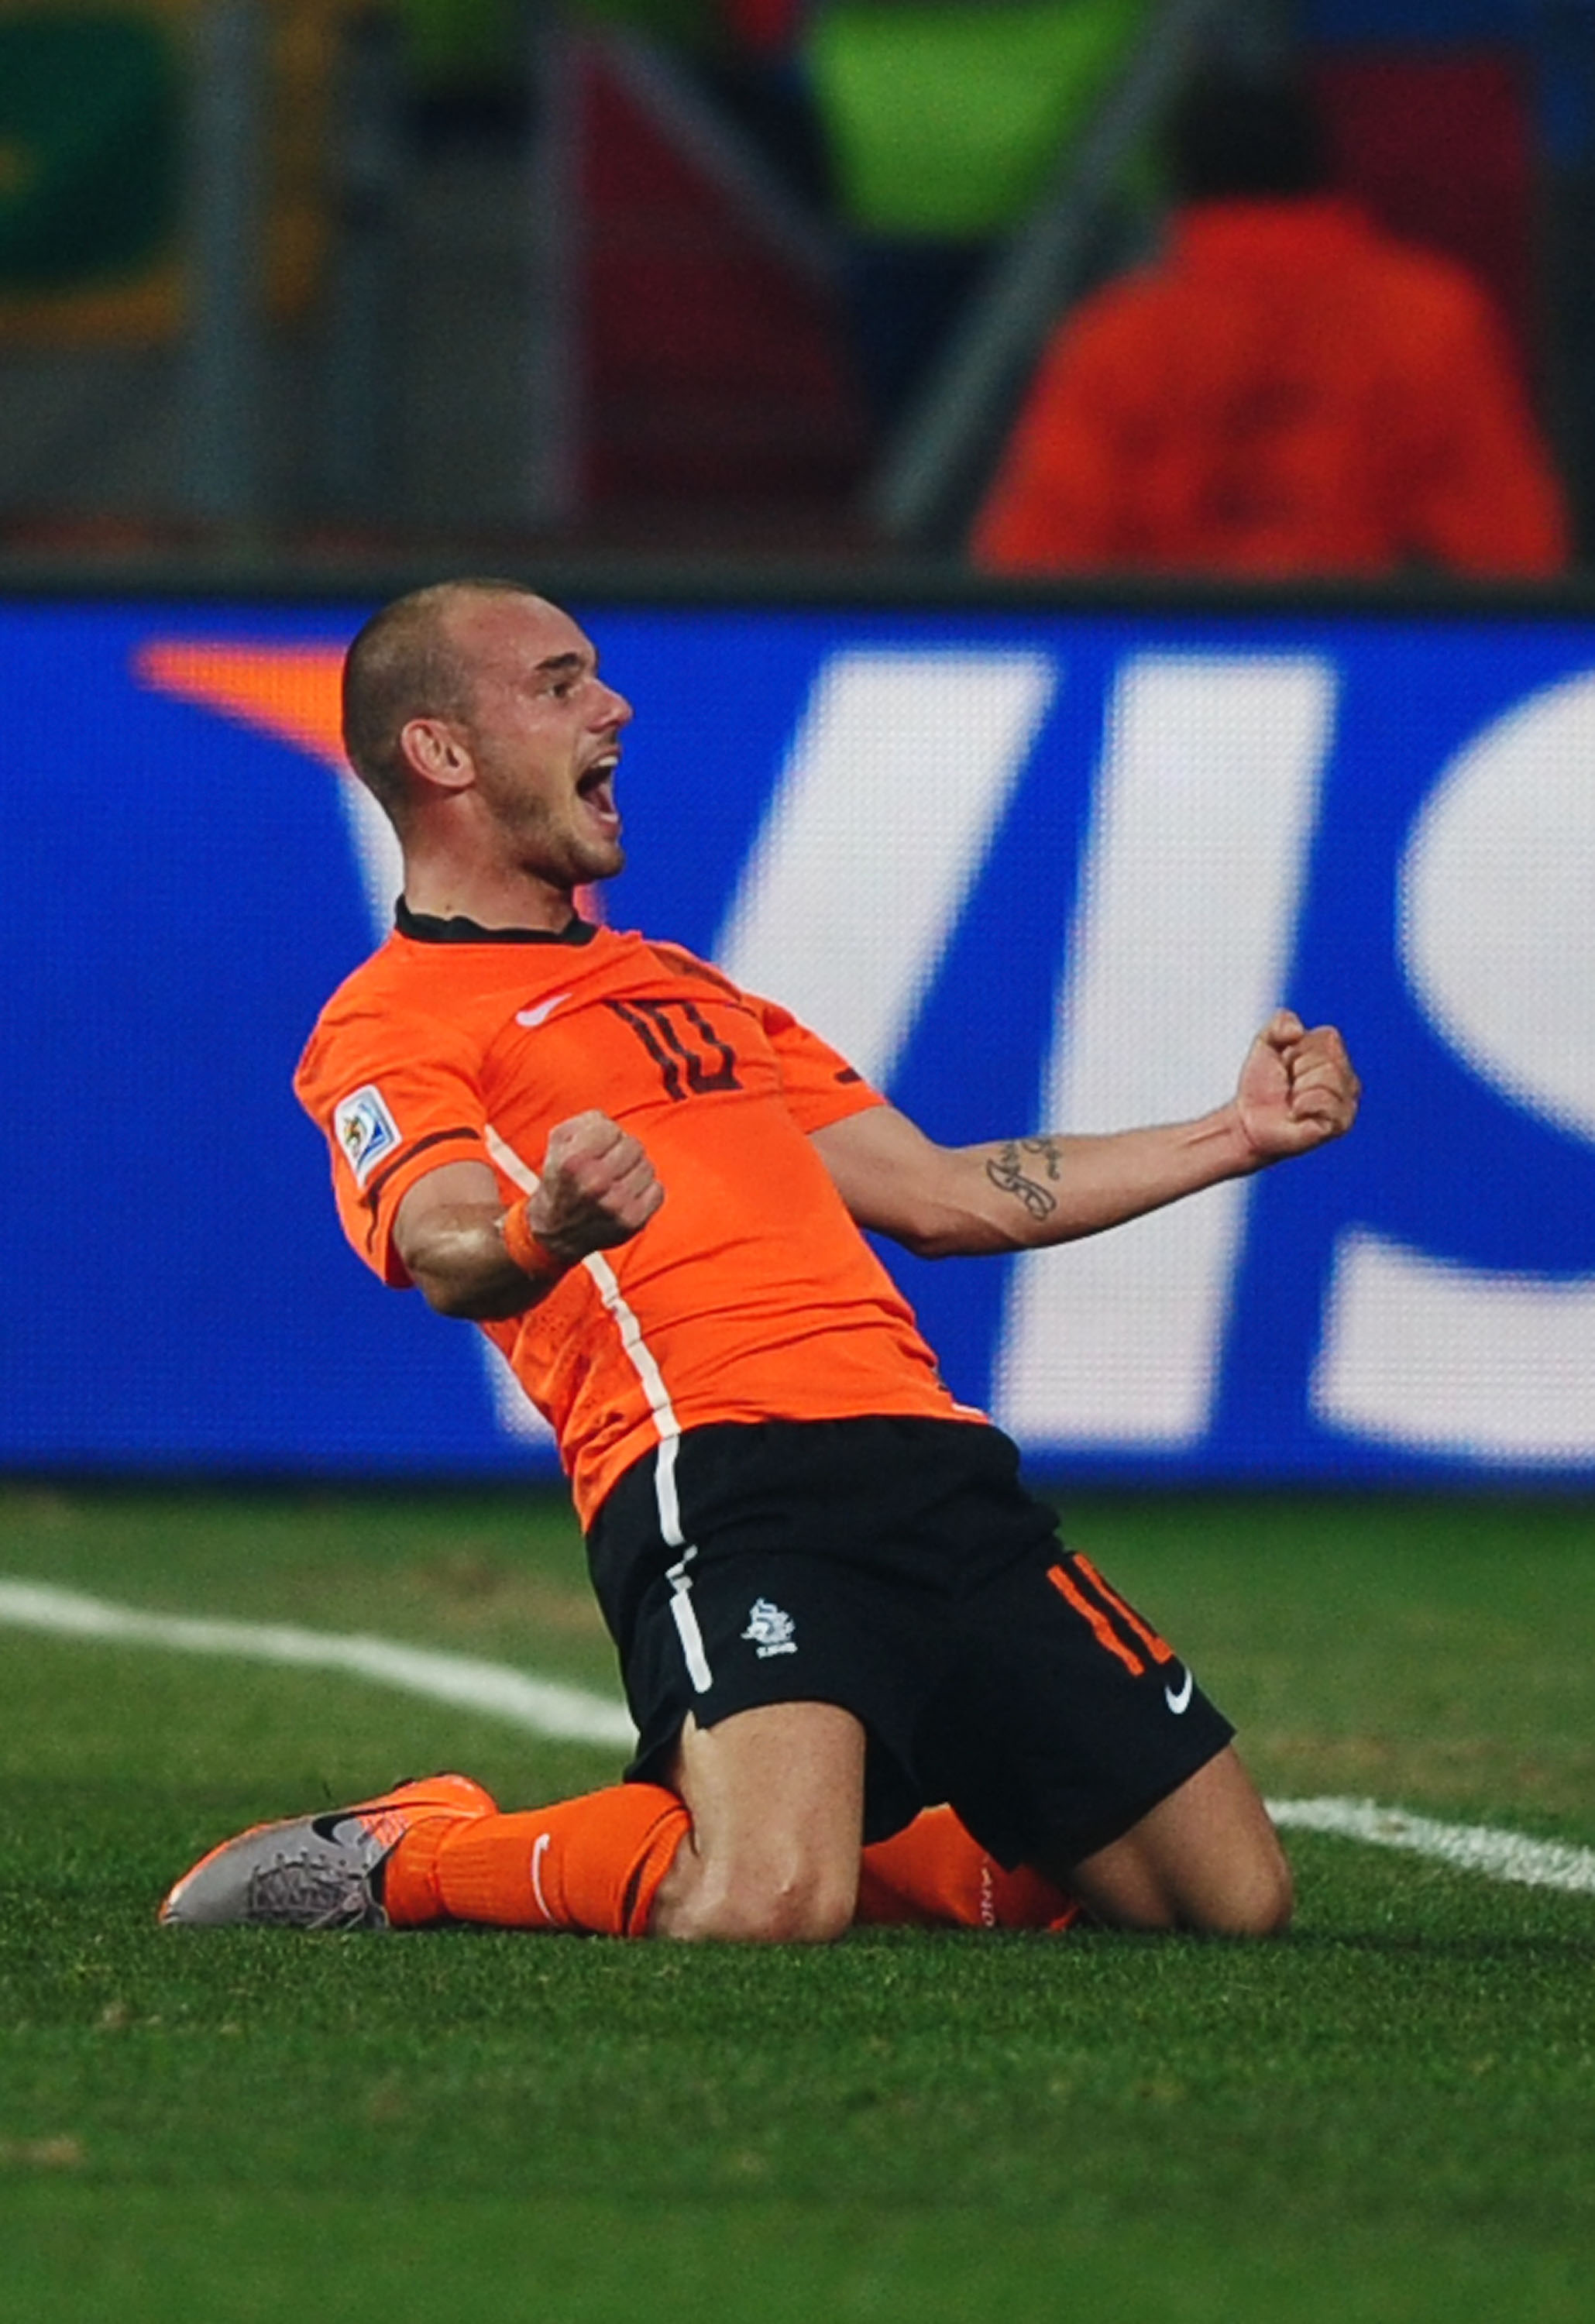 PORT ELIZABETH, SOUTH AFRICA - JULY 02:  Wesley Sneijder of the Netherlands celebrates scoring his team's second goal during the 2010 FIFA World Cup South Africa Quarter Final match between Netherlands and Brazil at Nelson Mandela Bay Stadium on July 2, 2